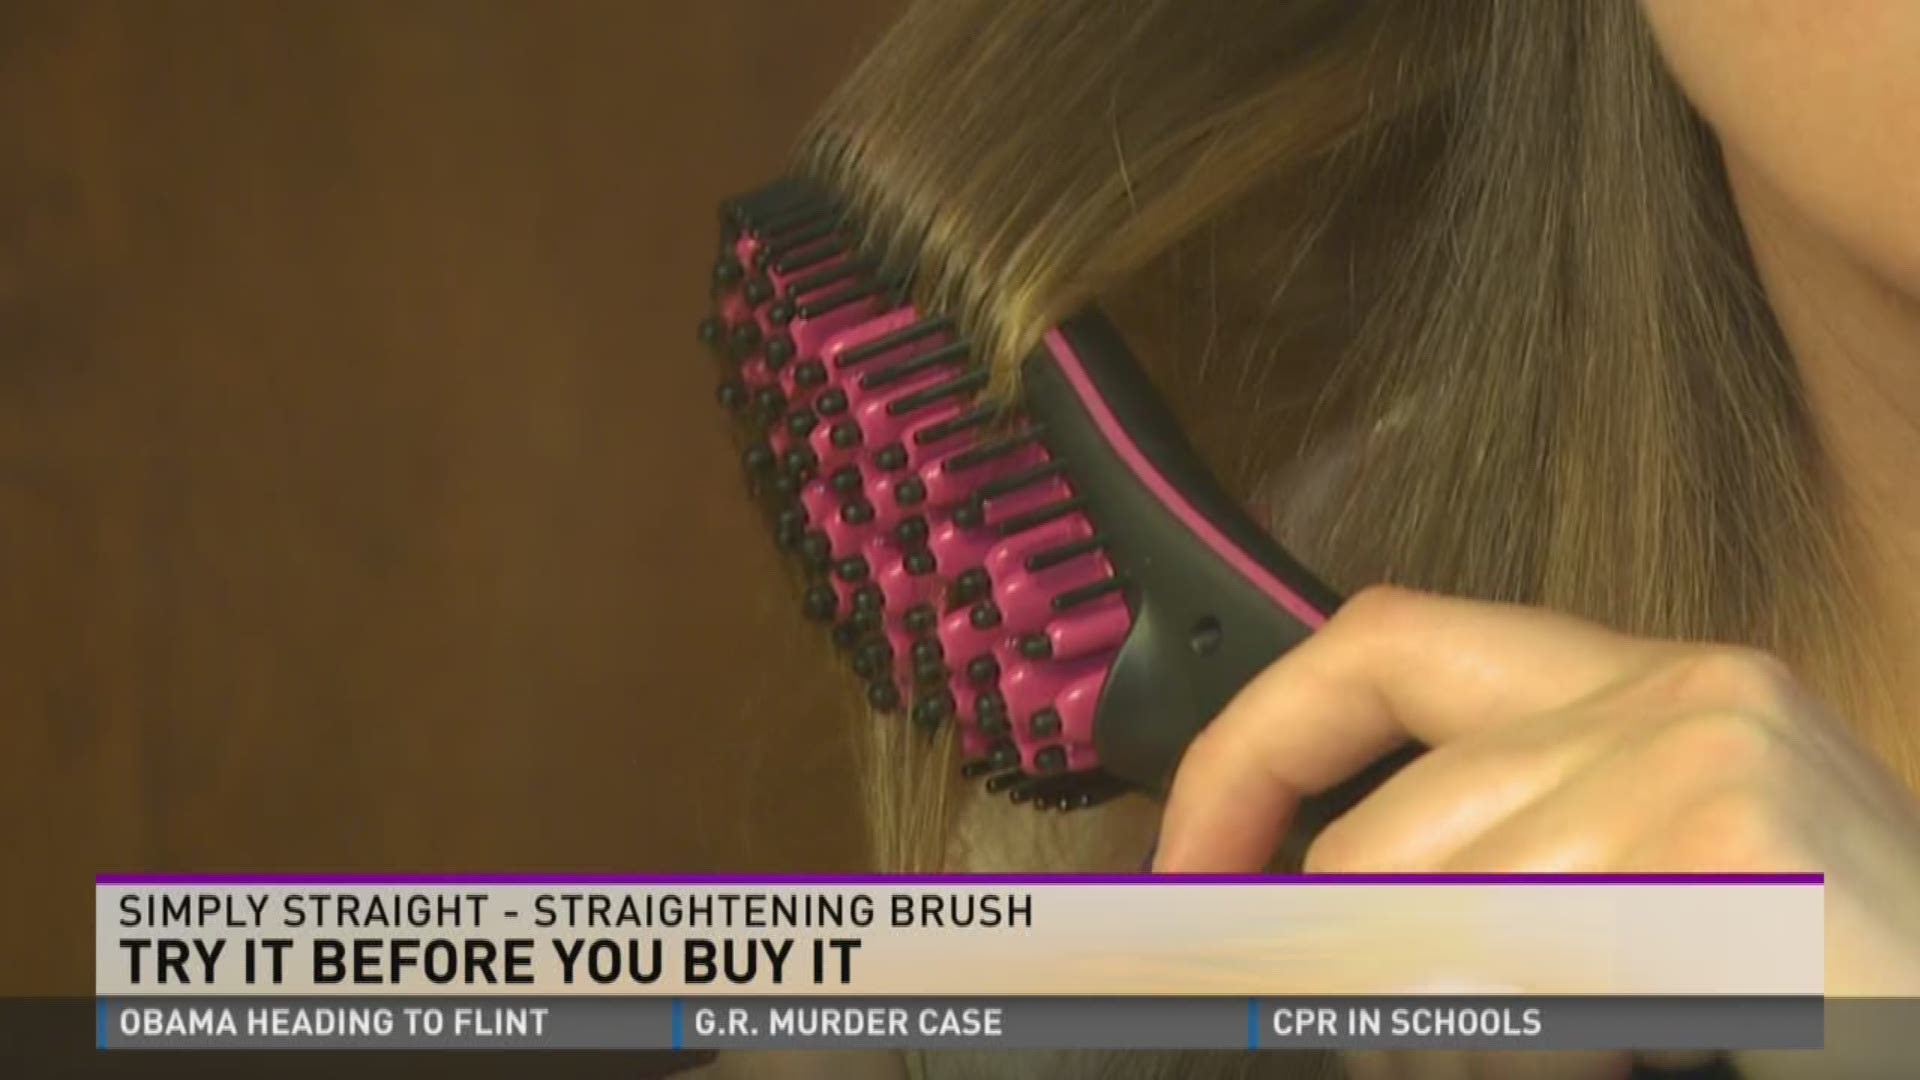 Lauren Stanton tells us about a product that claims to make straightening your hair easier than ever before.